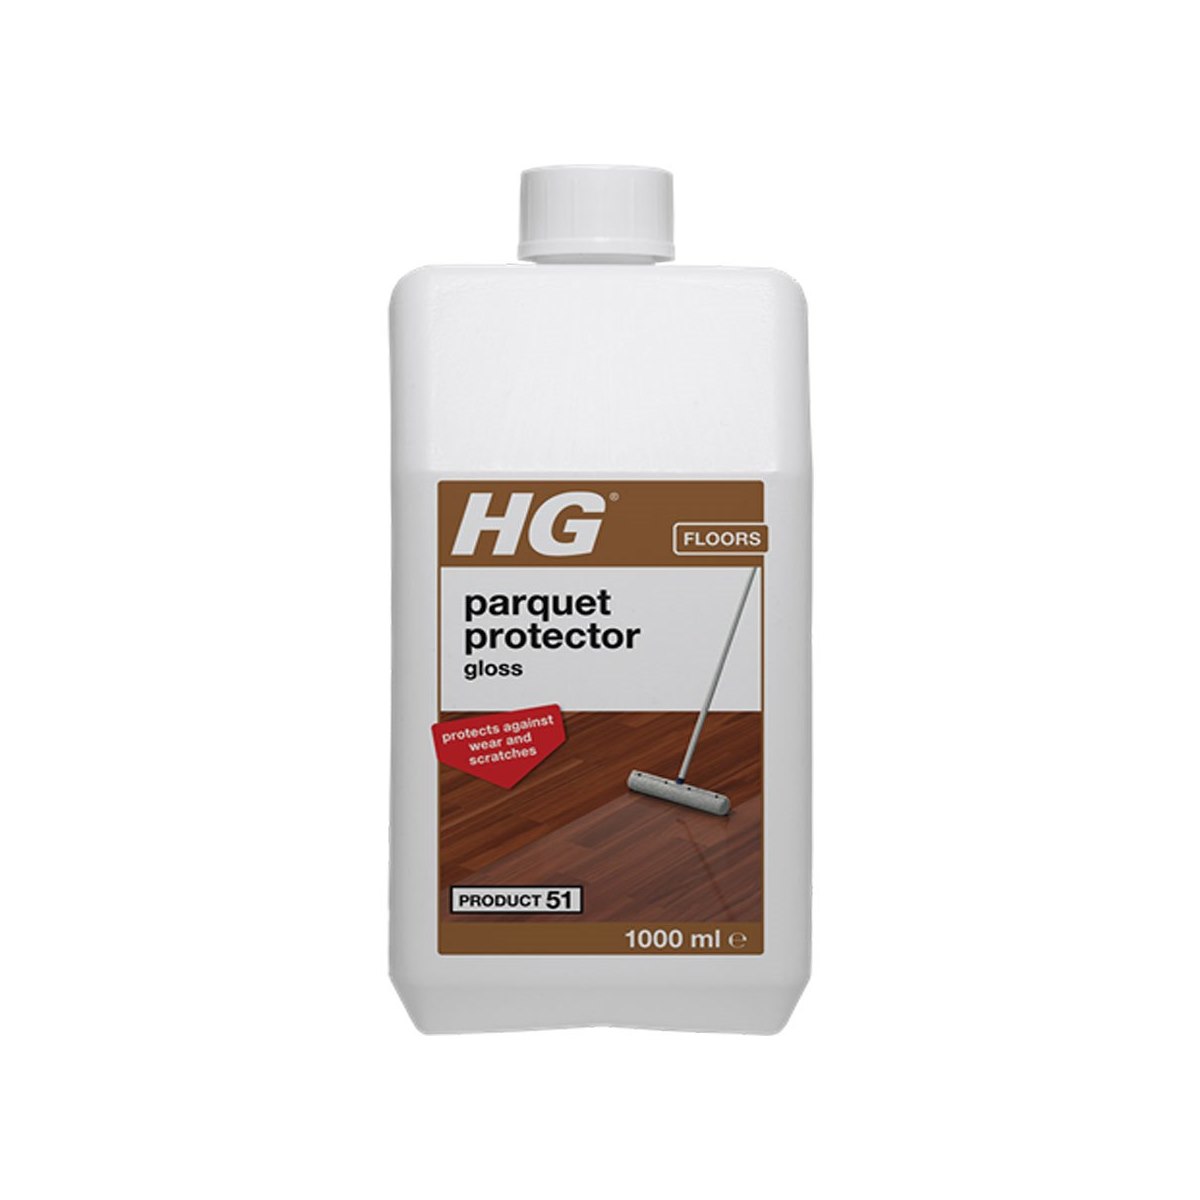 HG Parquet Protector Gloss 1 Litre Product 51